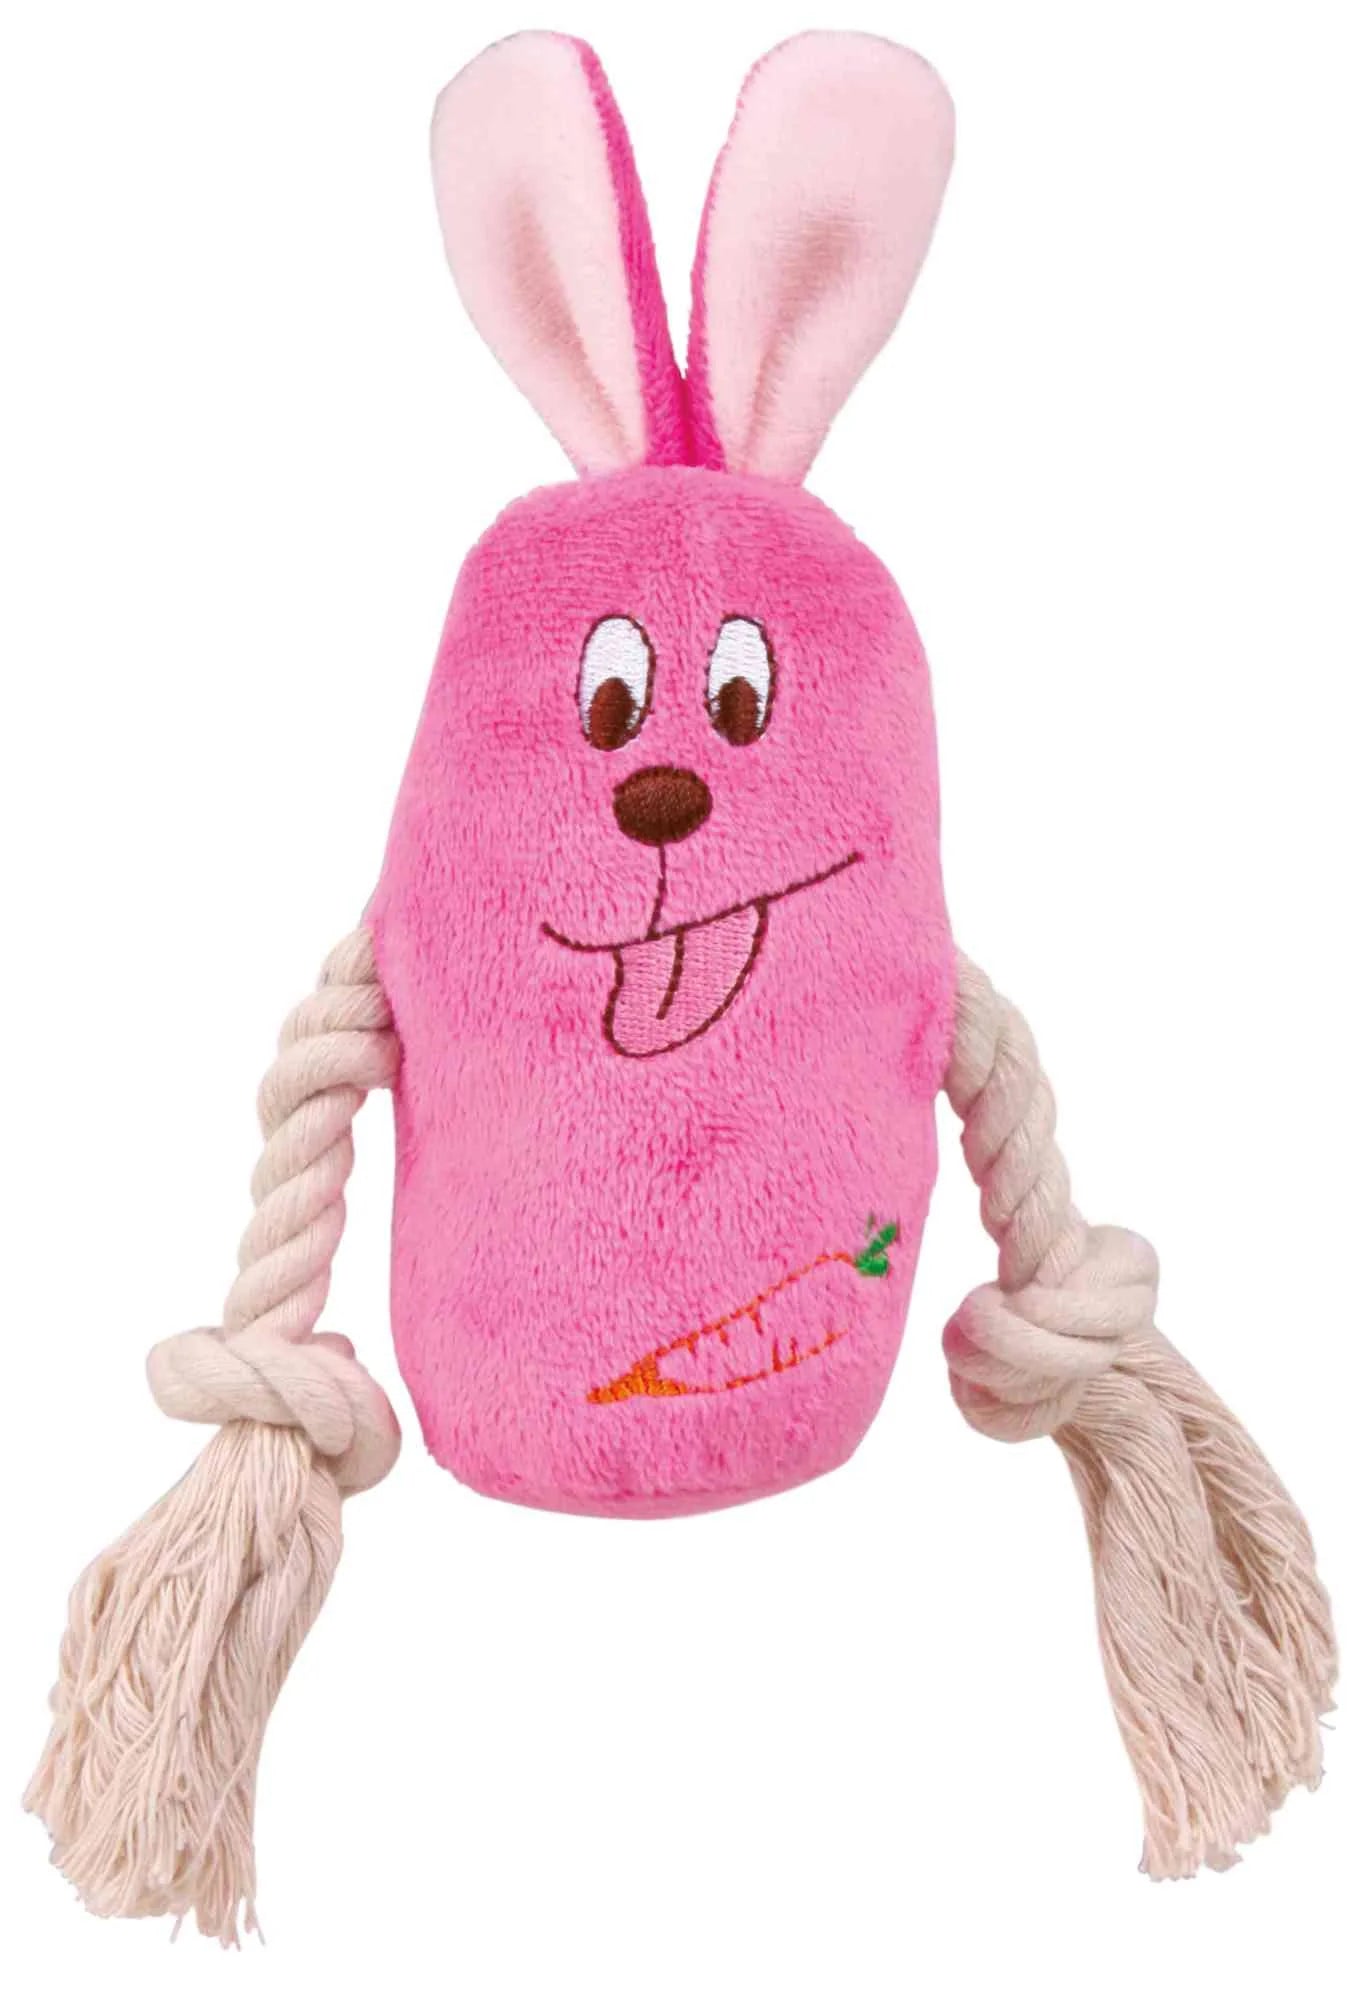 Trixie Animal With Rope Plush Sorted Toy For Dogs 13cm